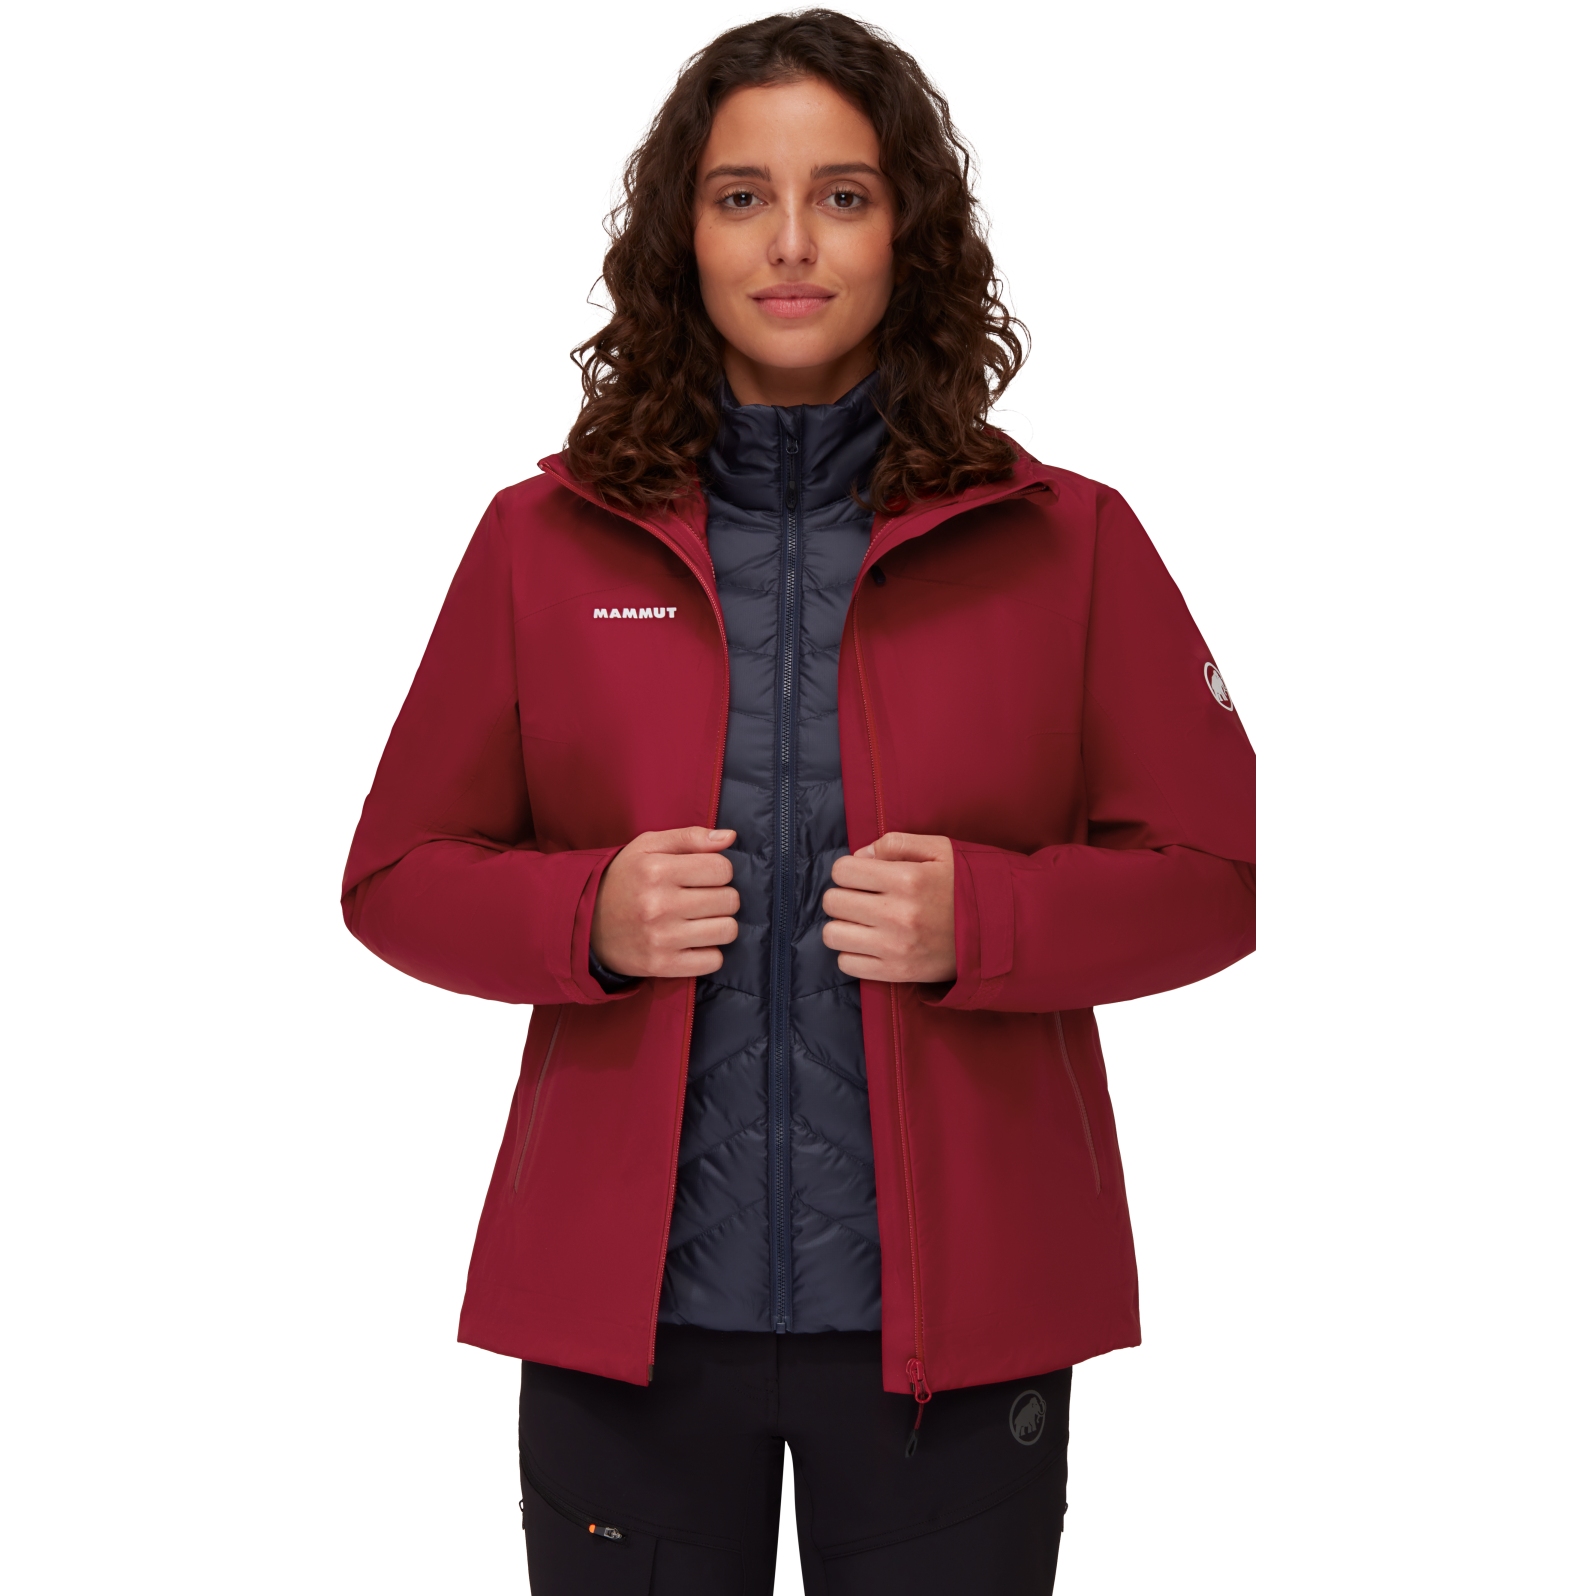 Foto de Mammut Chaqueta con Capucha Mujer - Convey 3 in 1 Hardshell - blood red-marine